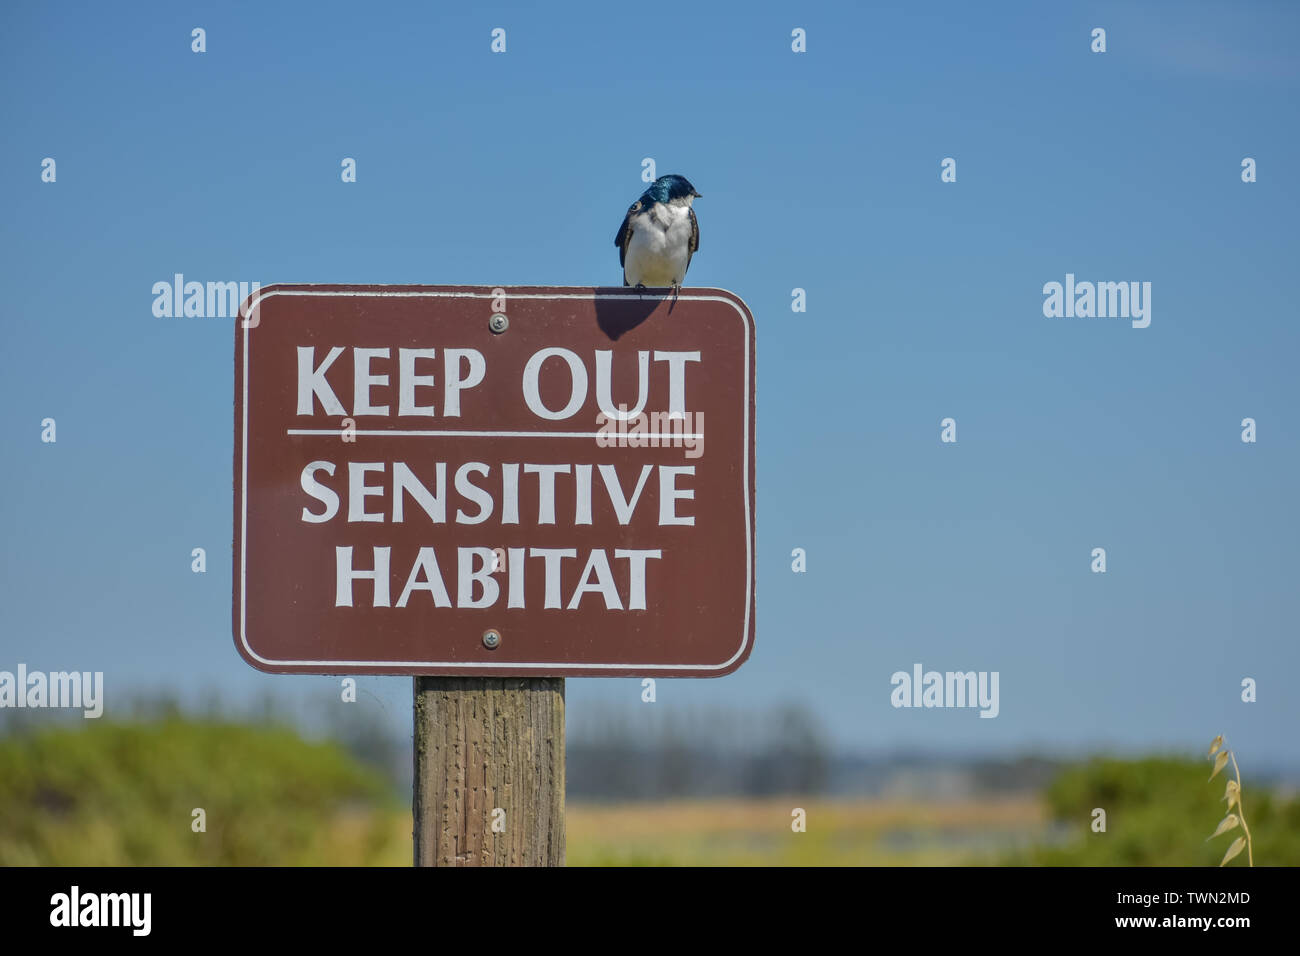 Cute little tree swallow perched on a 'Keep Out Sensitive Habitat' sign at wetlands nature preserve. Stock Photo